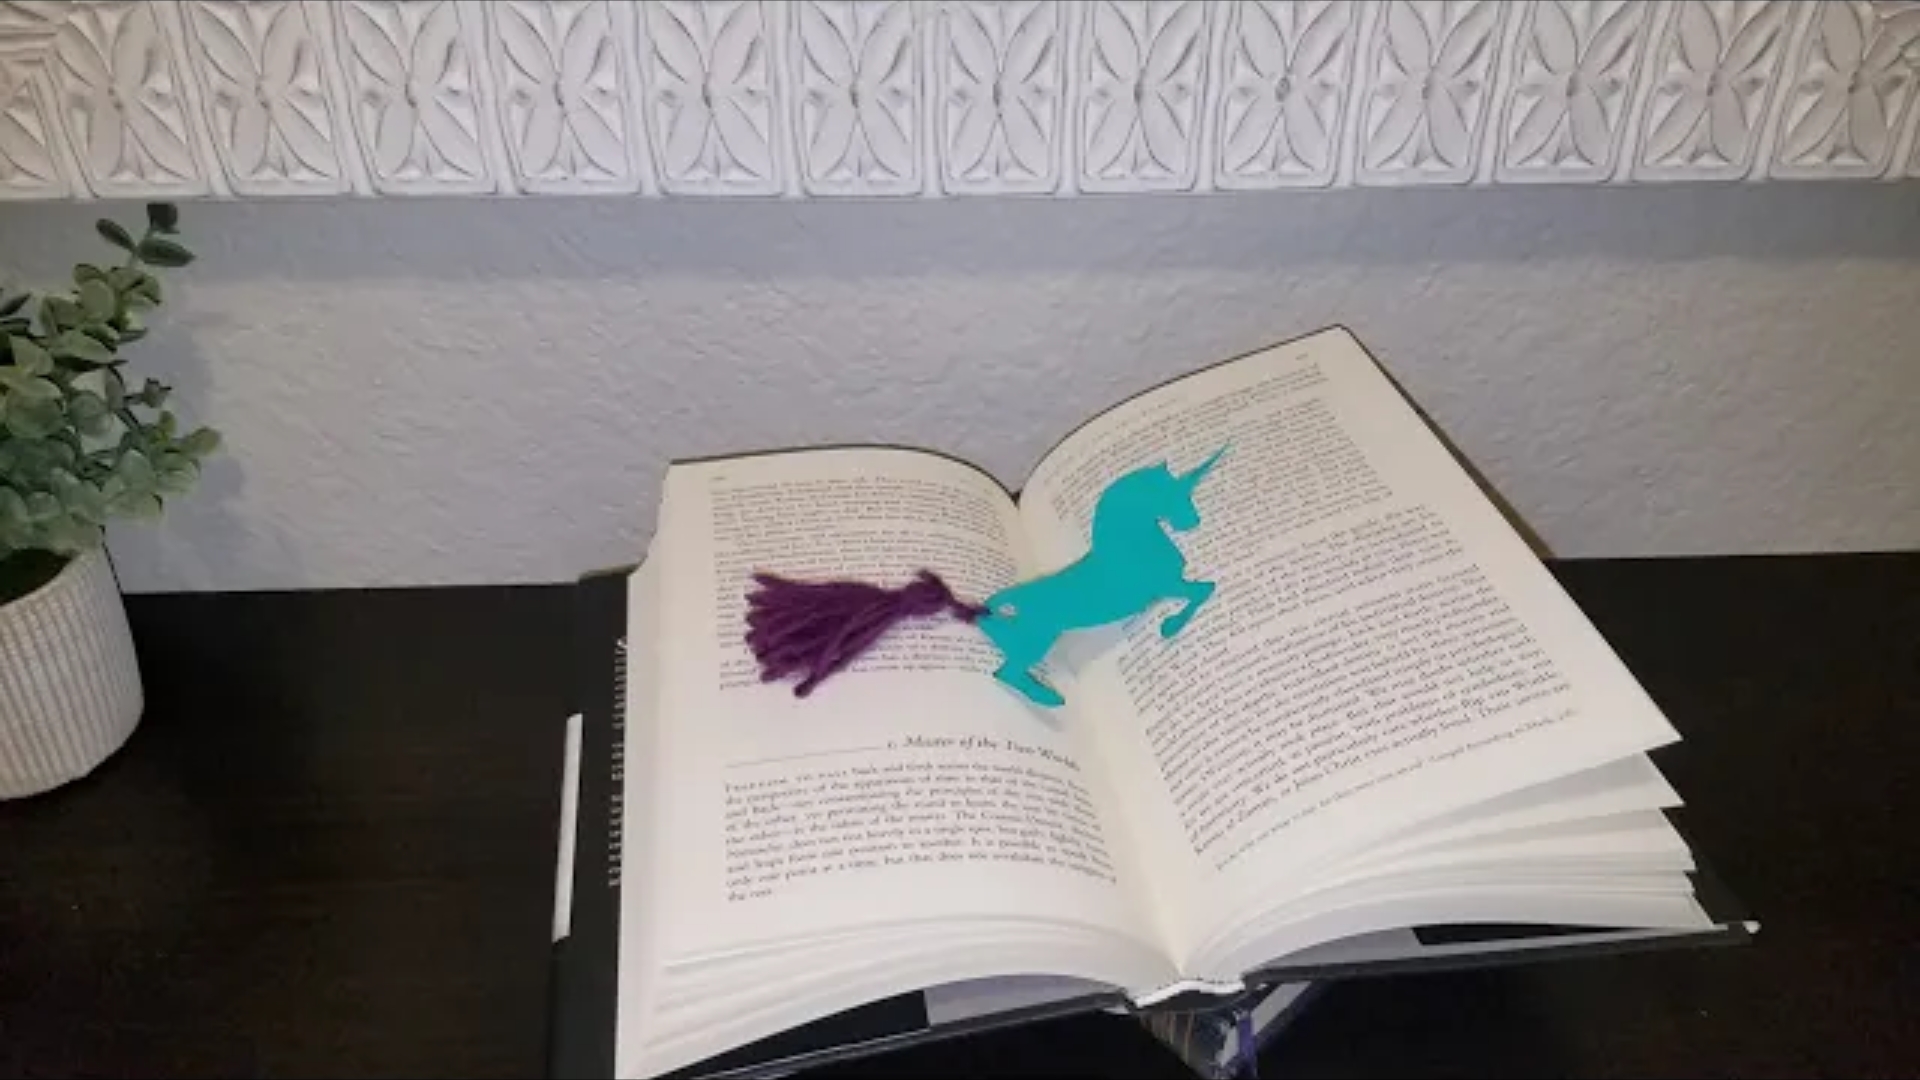 Blue unicorn bookmark with purple string tail sitting on an open book